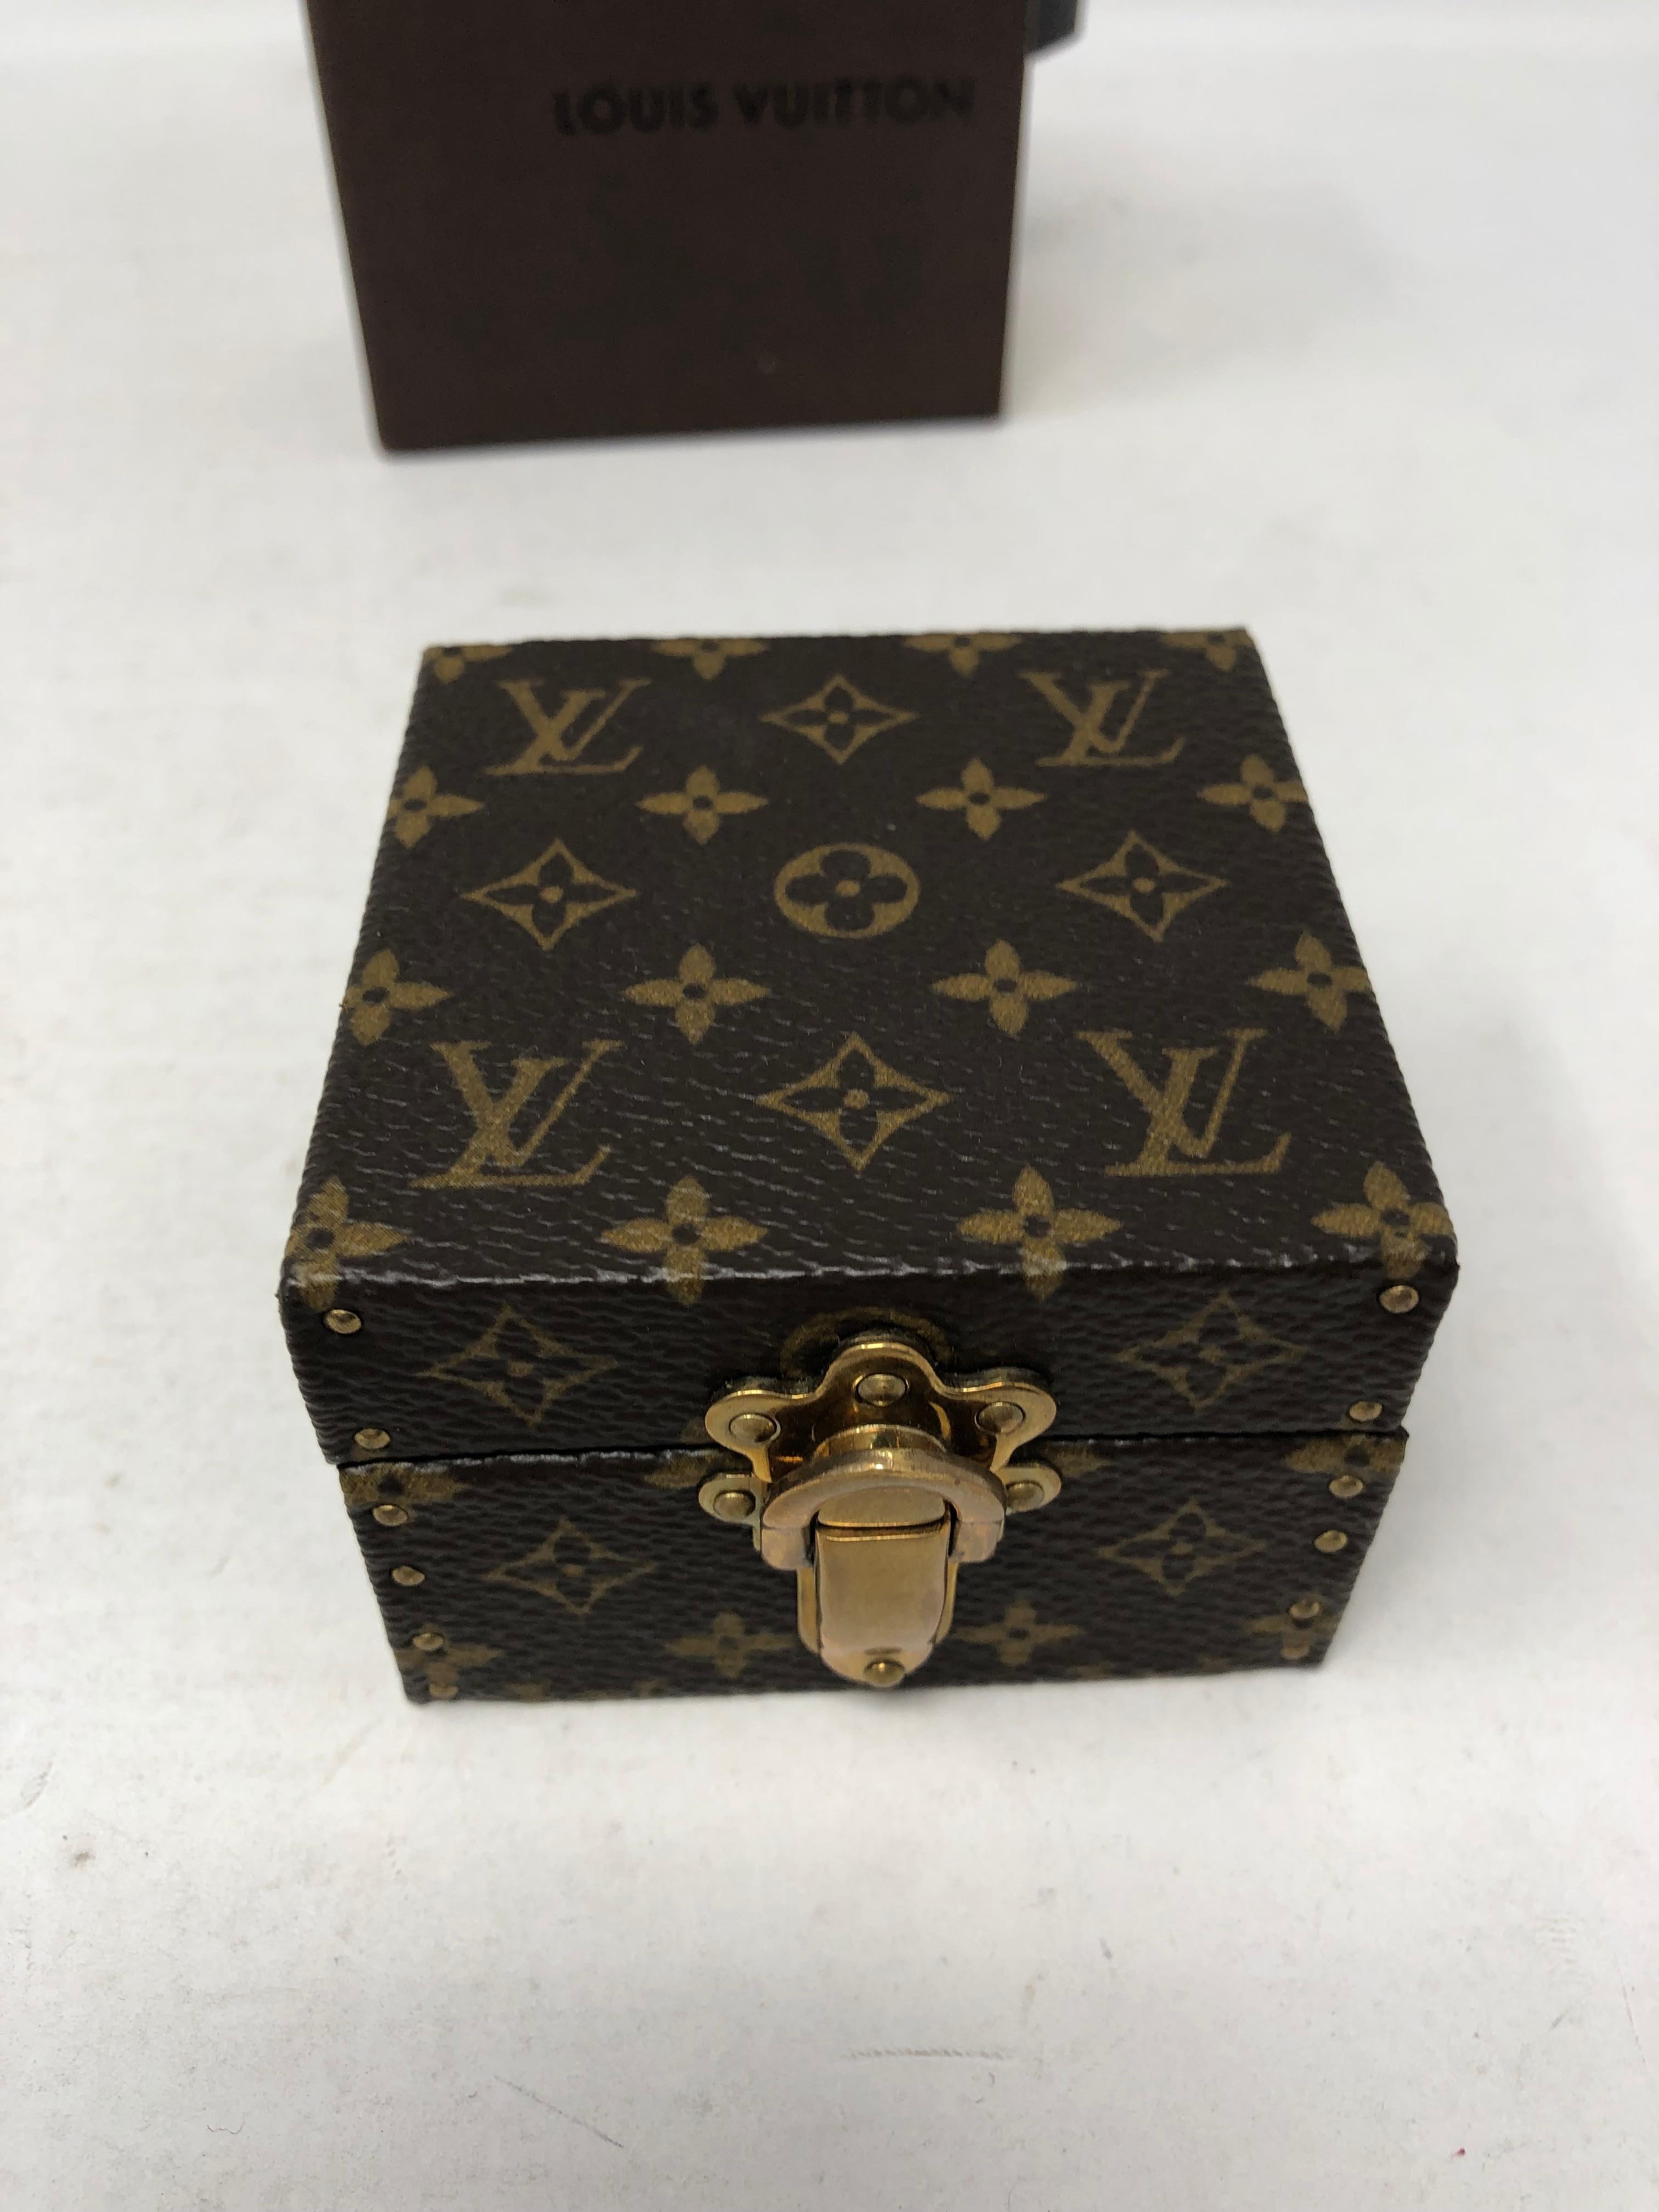 Louis Vuitton Ring Jewelry Case. Small jewelry holder. Mint condition. Great display piece. From an LV collector. Guaranteed authentic. 